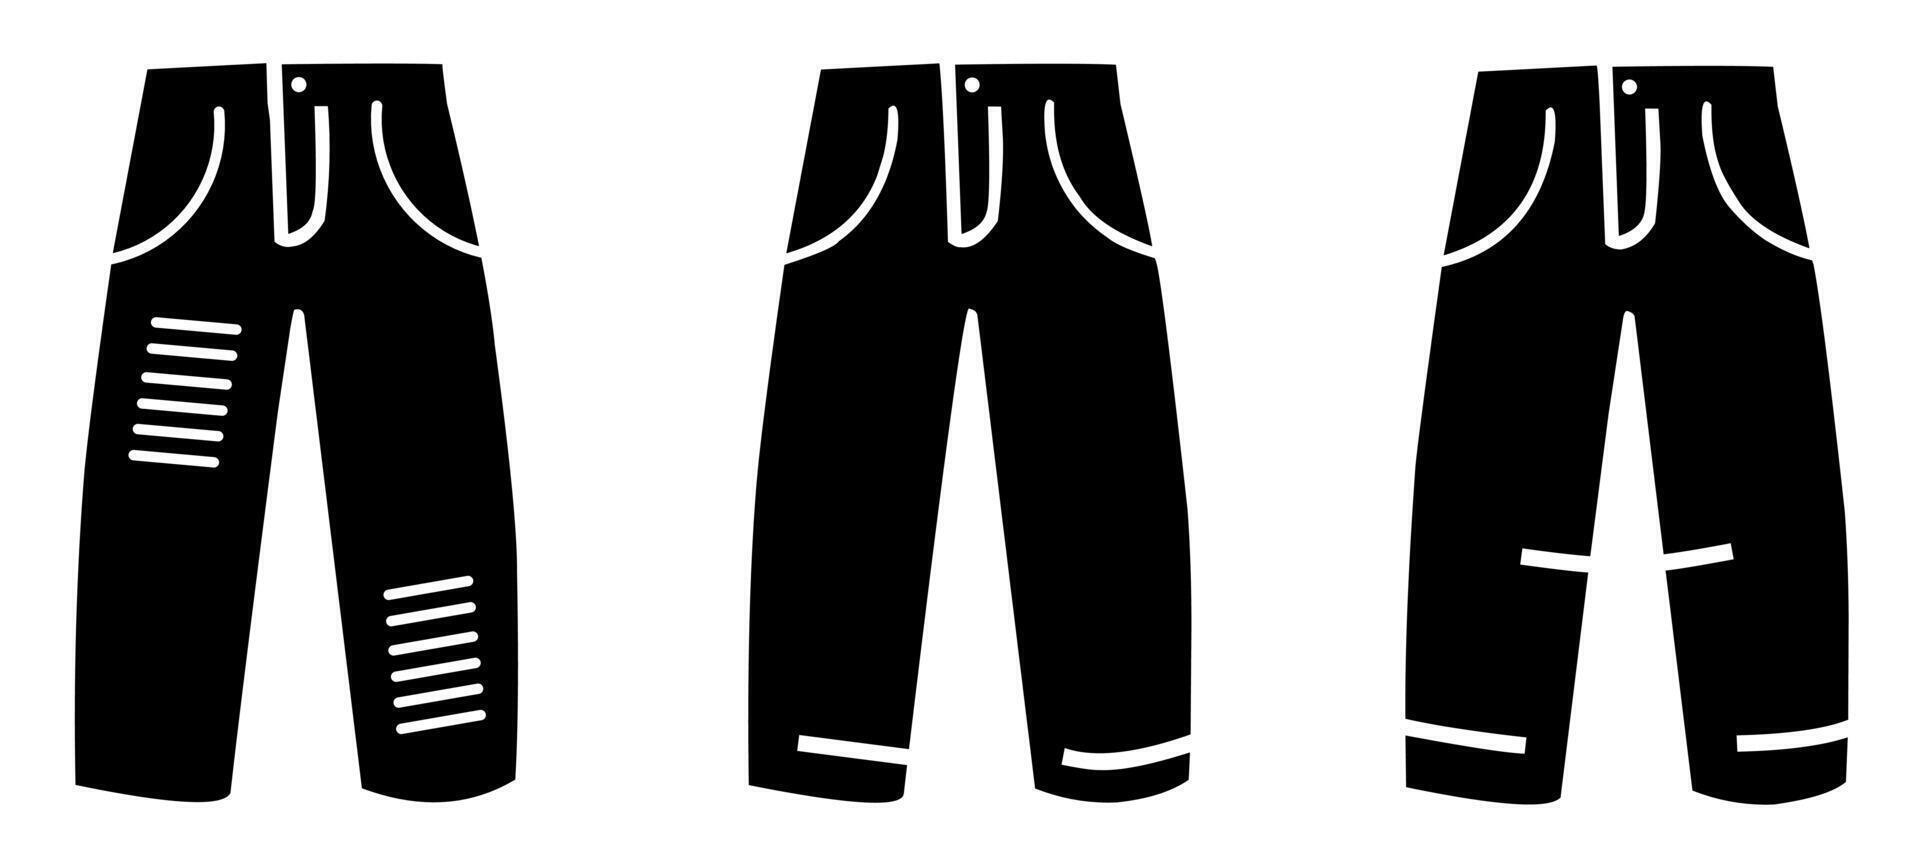 Pants icon. Collection vector illustration of icons for business. Black icon design.